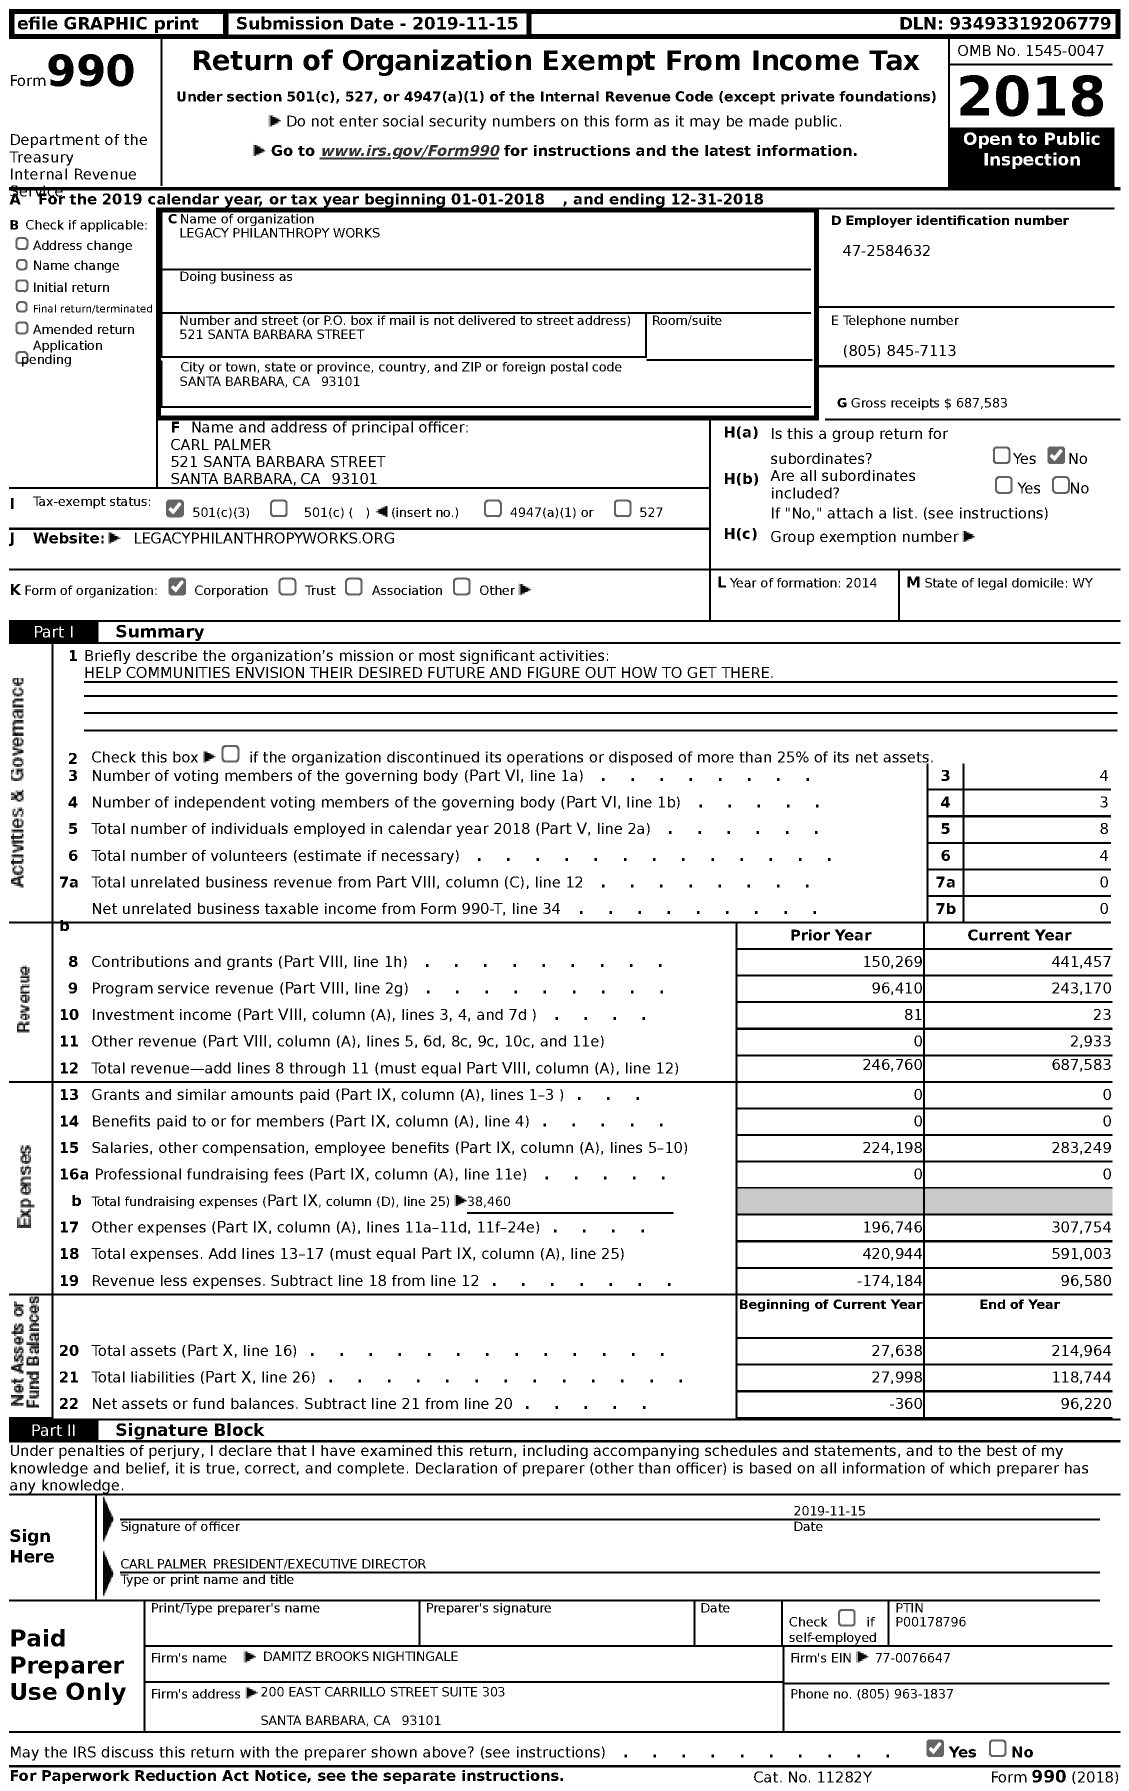 Image of first page of 2018 Form 990 for Legacy Philanthropy Works